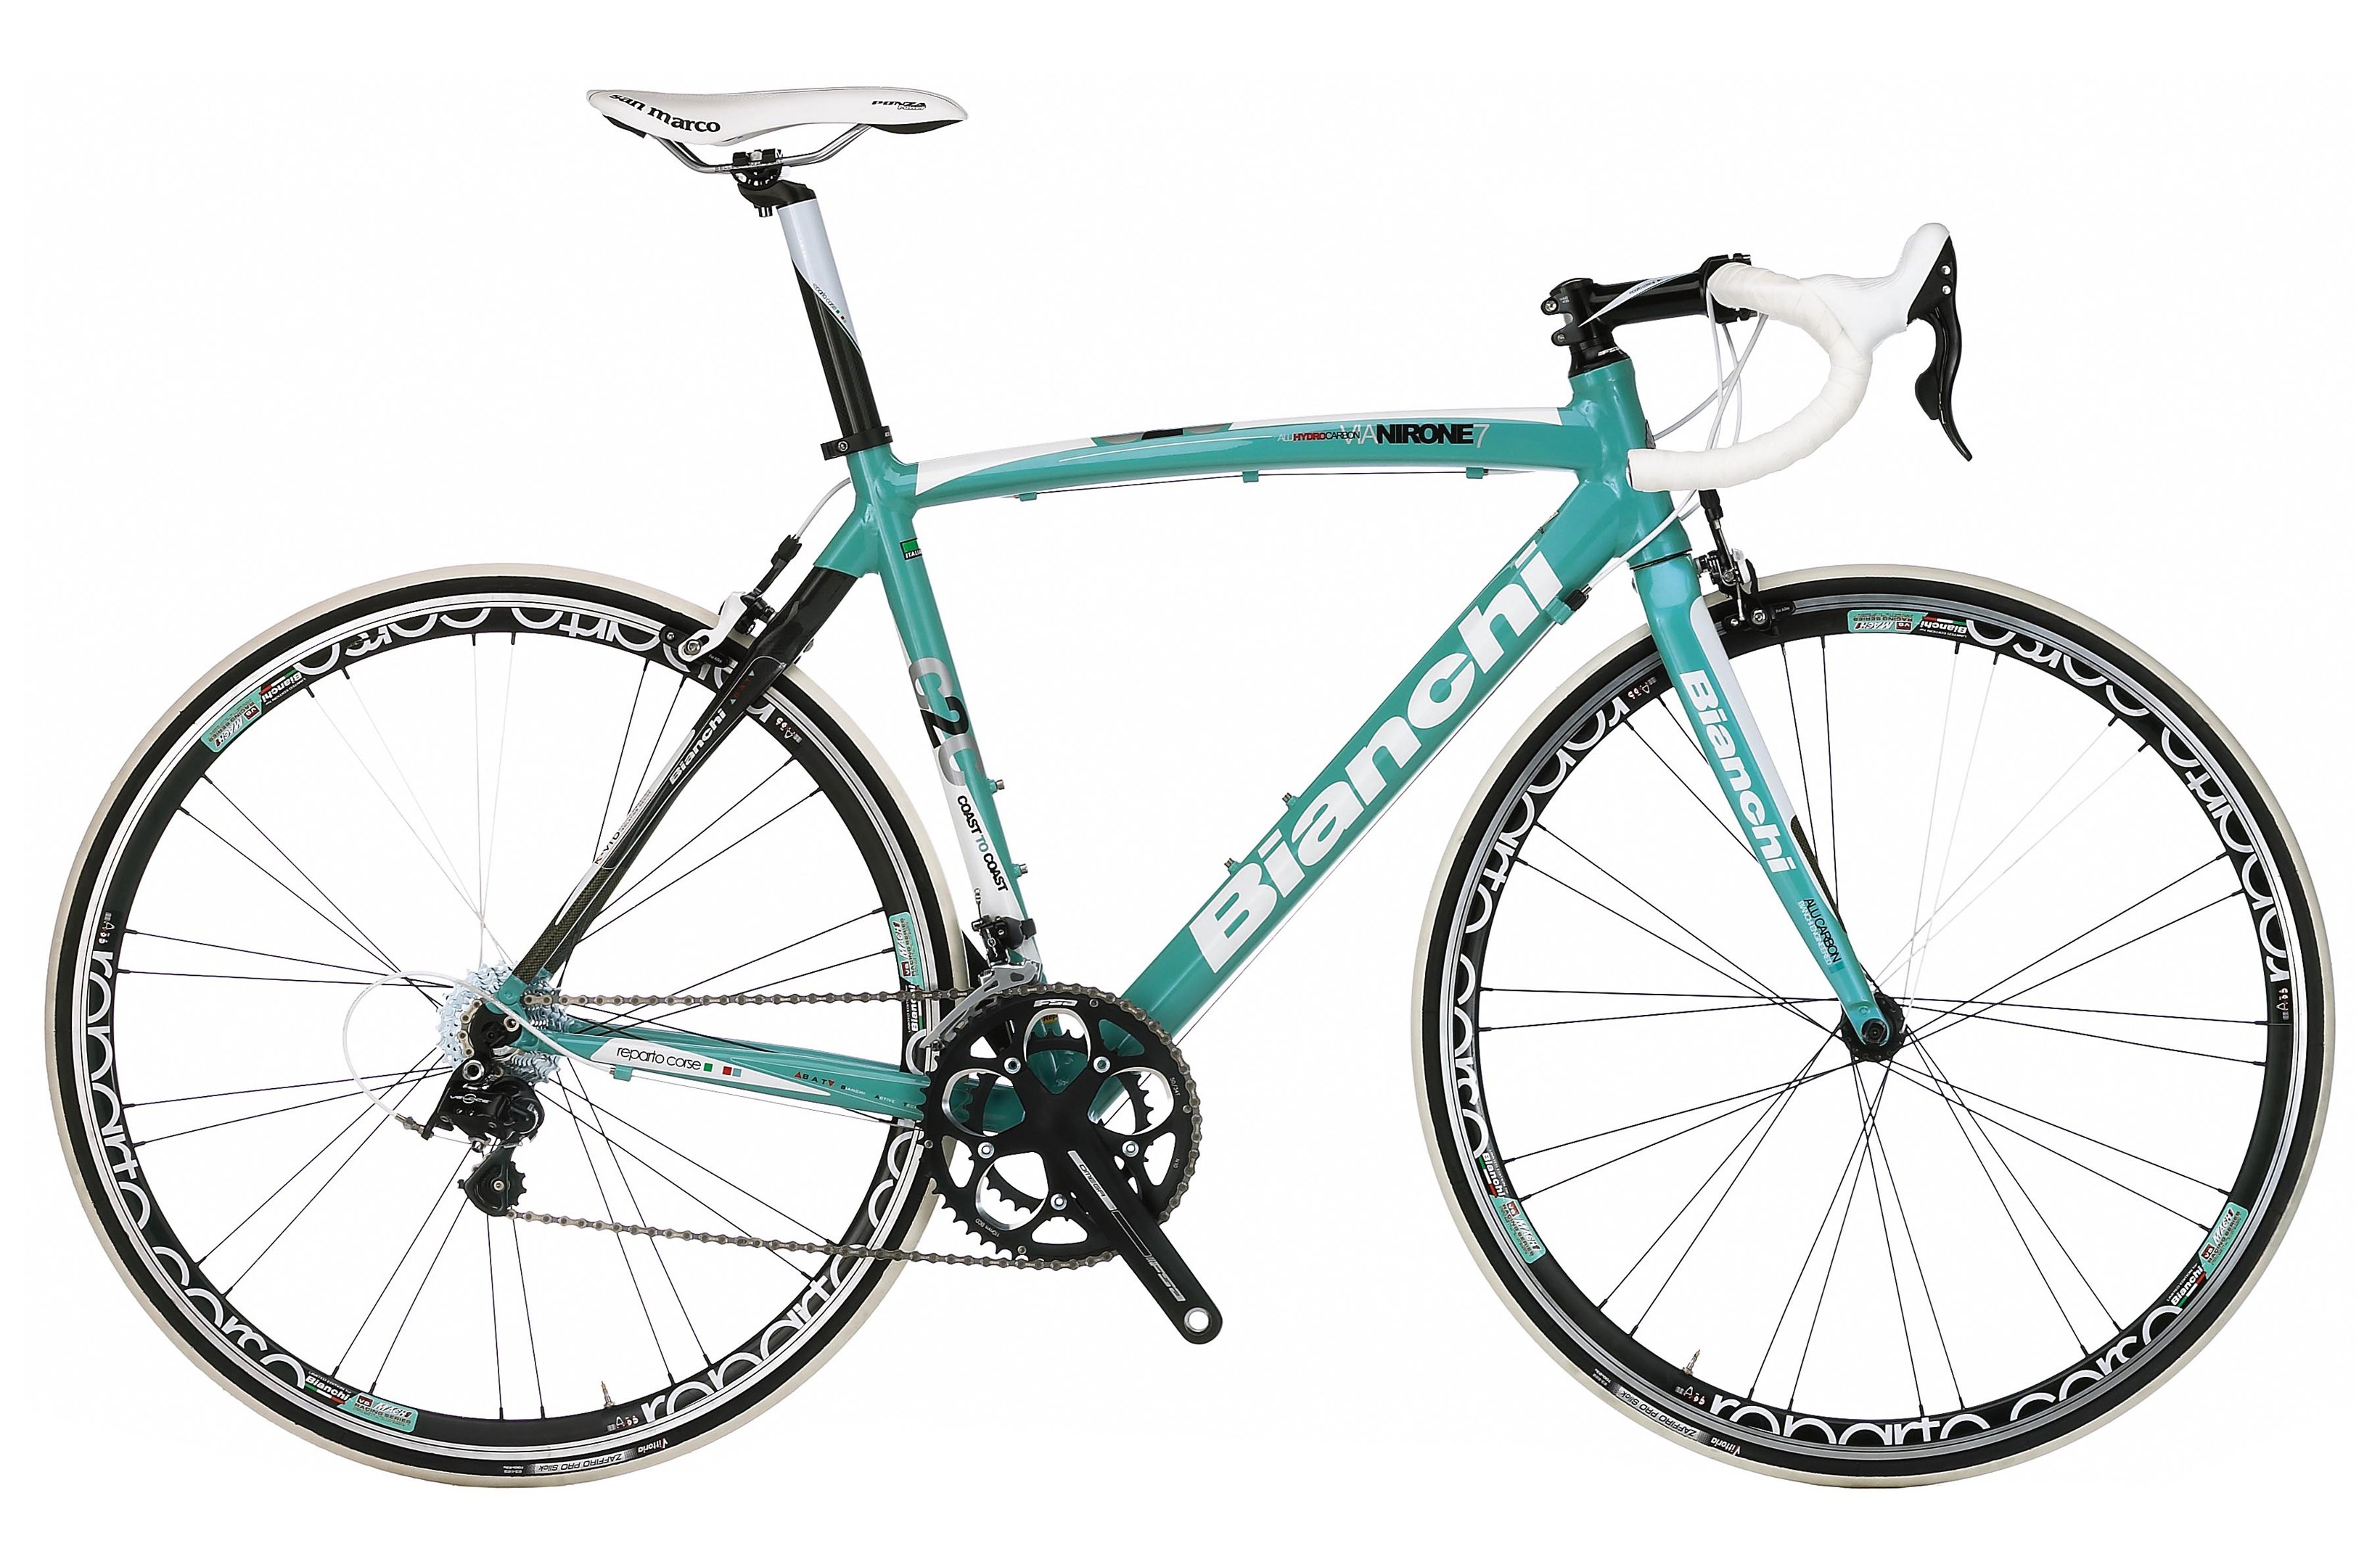 Bianchi Bicycle Bike Wallpapers Hd Desktop And Mobile Backgrounds